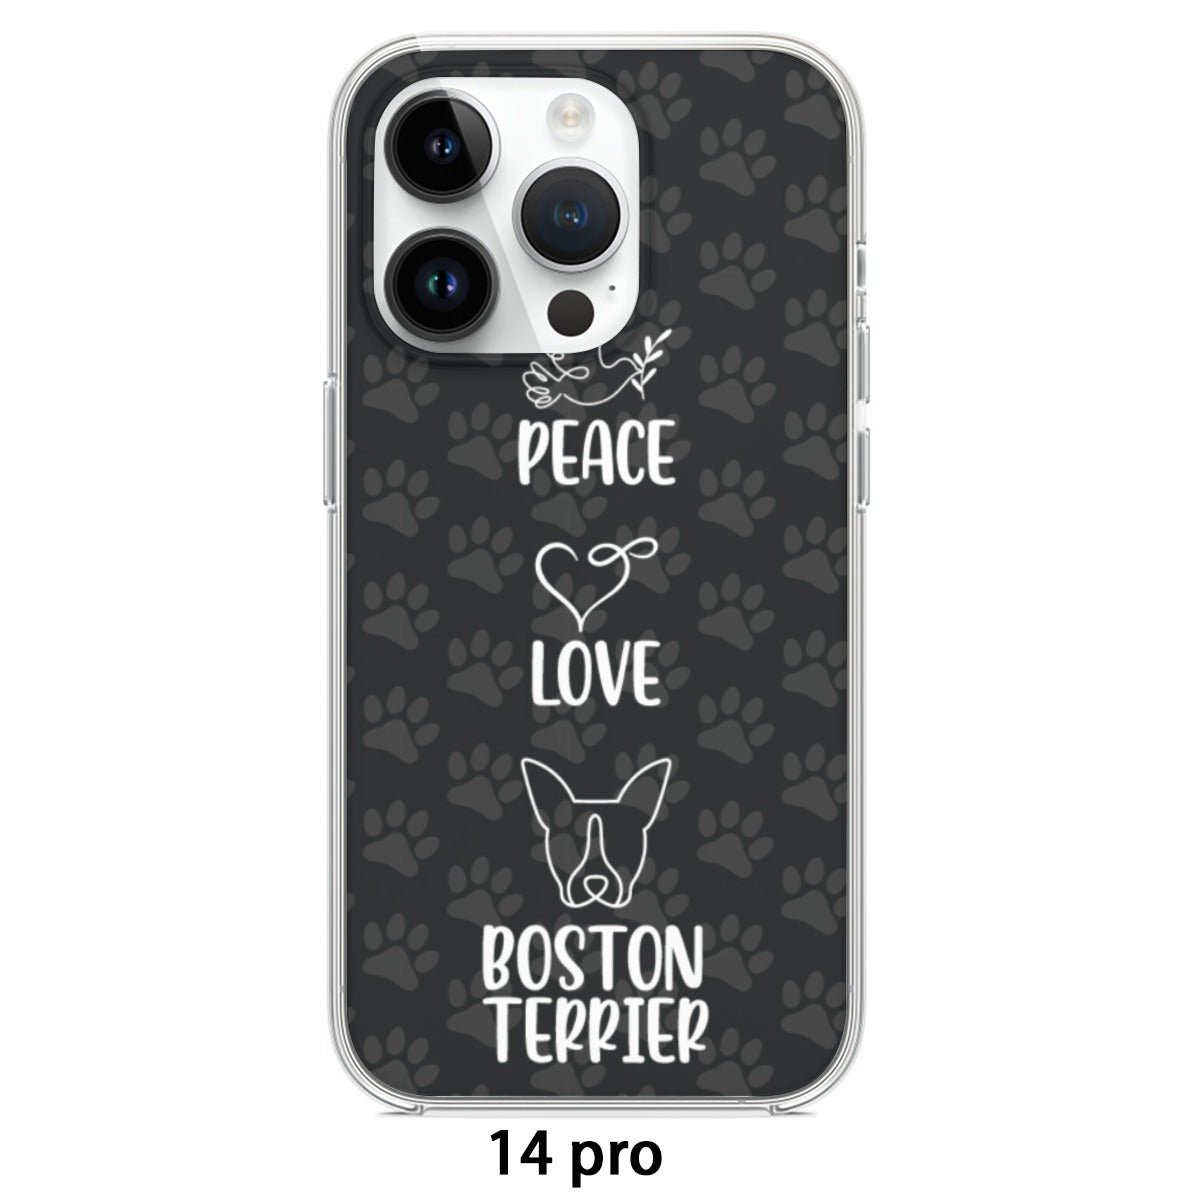 Cosmo - iPhone case for Boston Terrier lovers